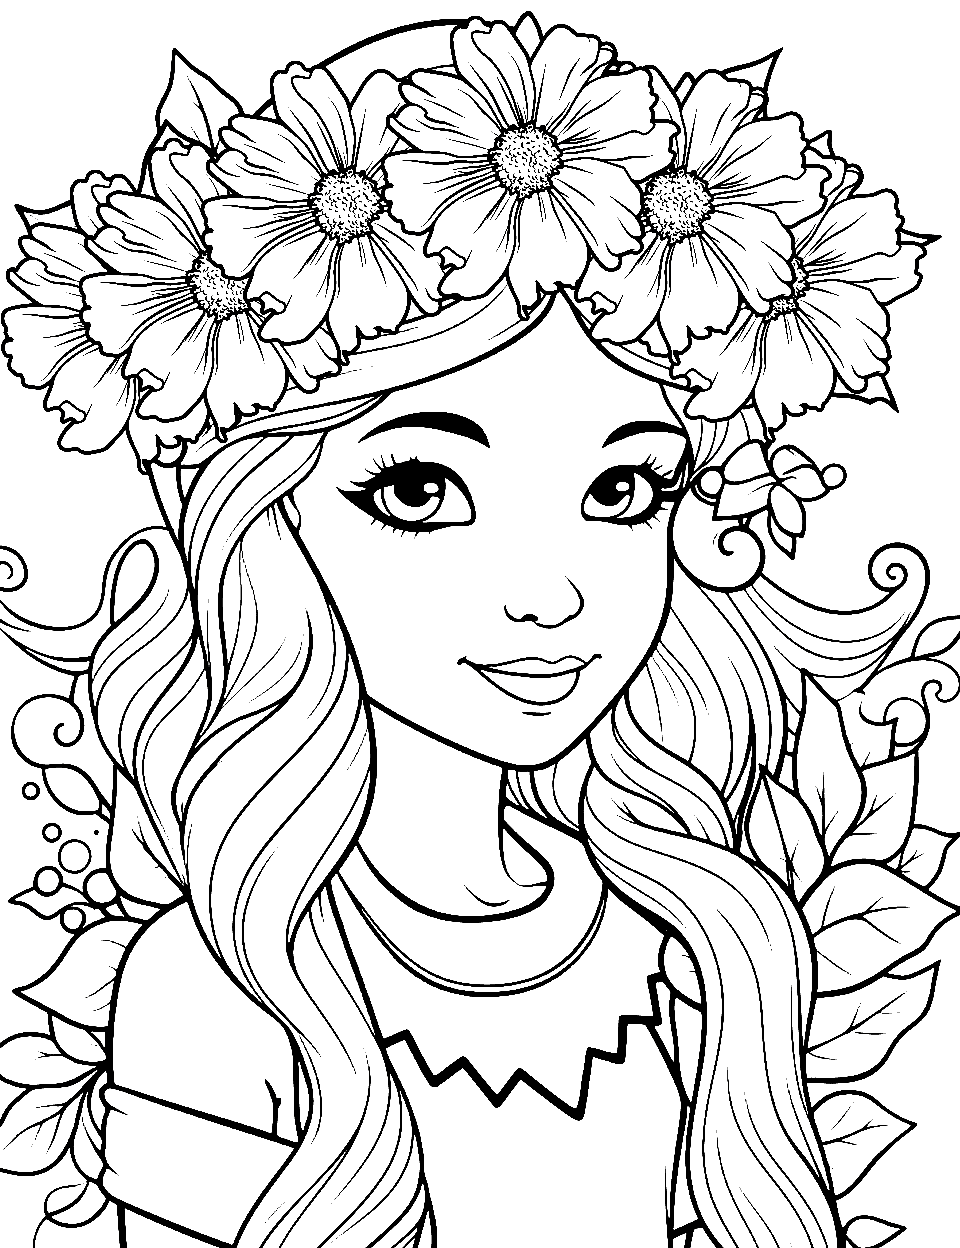 Elf Girl with Flower Crown Coloring Page - A beautiful elf girl adorned with a crown of wildflowers.